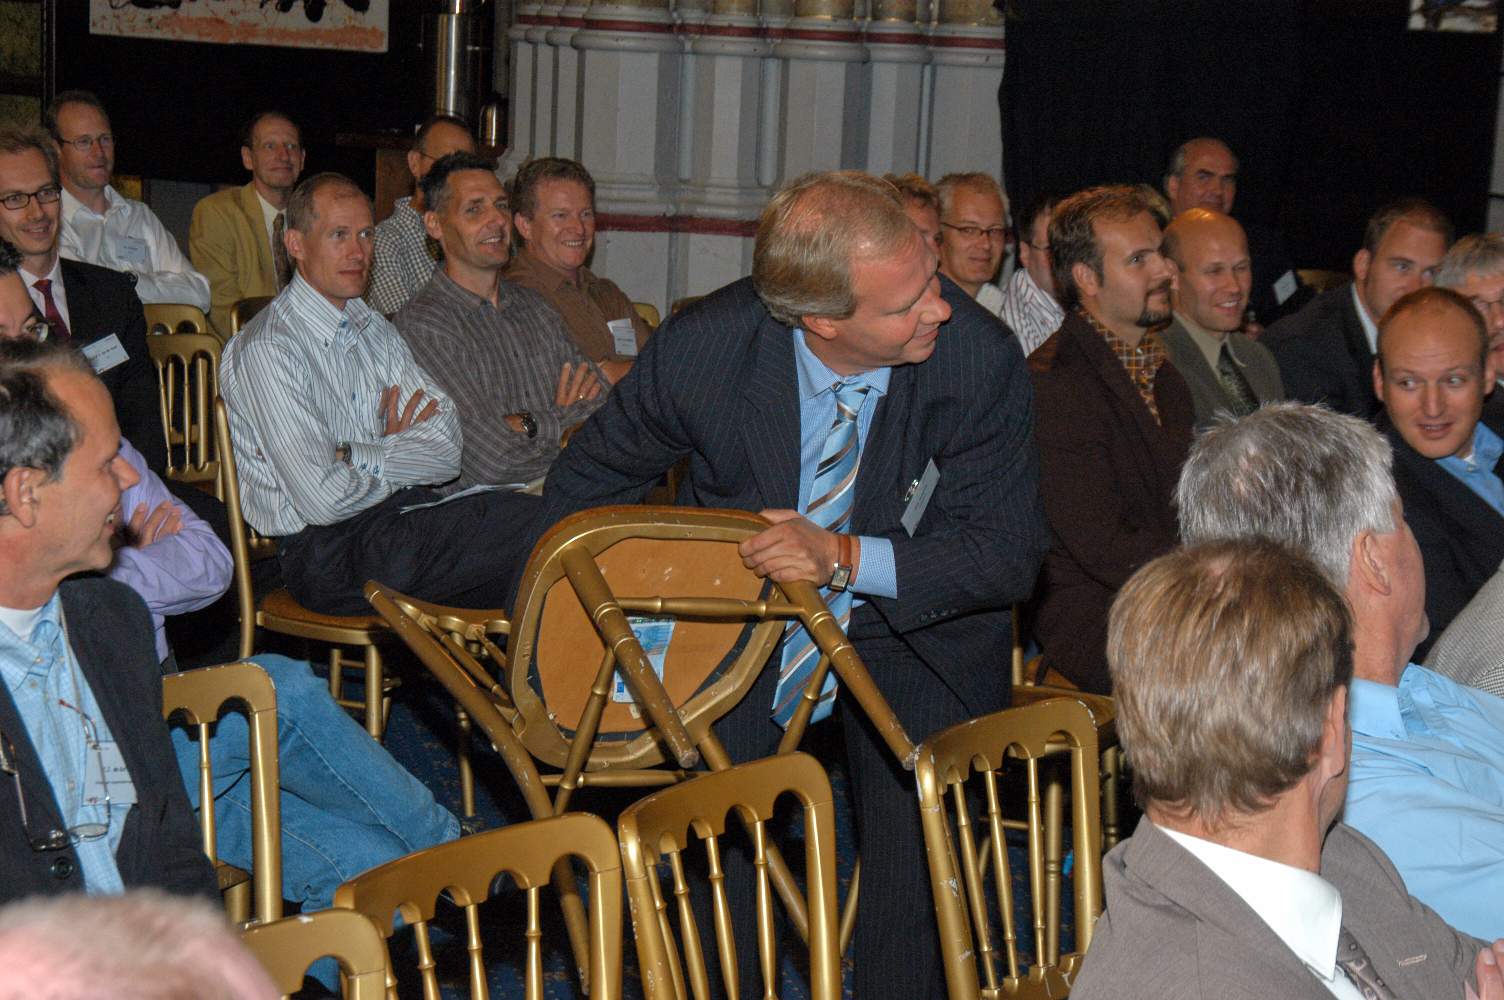 Compuware Customer Technology Briefing / Face 2 Face16 september 2004 - Orangerie Den BoschFoto door Erik van Roon
[#Beginning of Shooting Data Section]Nikon D100 
Focal Length: 50mm
White Balance: Auto
Color Mode: Mode I (sRGB)
2004/09/16 13:30:56.7
Exposure Mode: Aperture Priority
AF Mode: AF-S
Hue Adjustment: 0°
JPEG (8-bit) Fine
Metering Mode: Center-Weighted
Tone Comp: Auto
Sharpening: Auto
Image Size:  Large (3008 x 2000)
1/60 sec - f/8
Flash Sync Mode: Front Curtain
Noise Reduction: OFF
Exposure Comp.: 0 EV
Auto Flash Mode: D-TTL
Image Comment:                                     
[#End of Shooting Data Section]